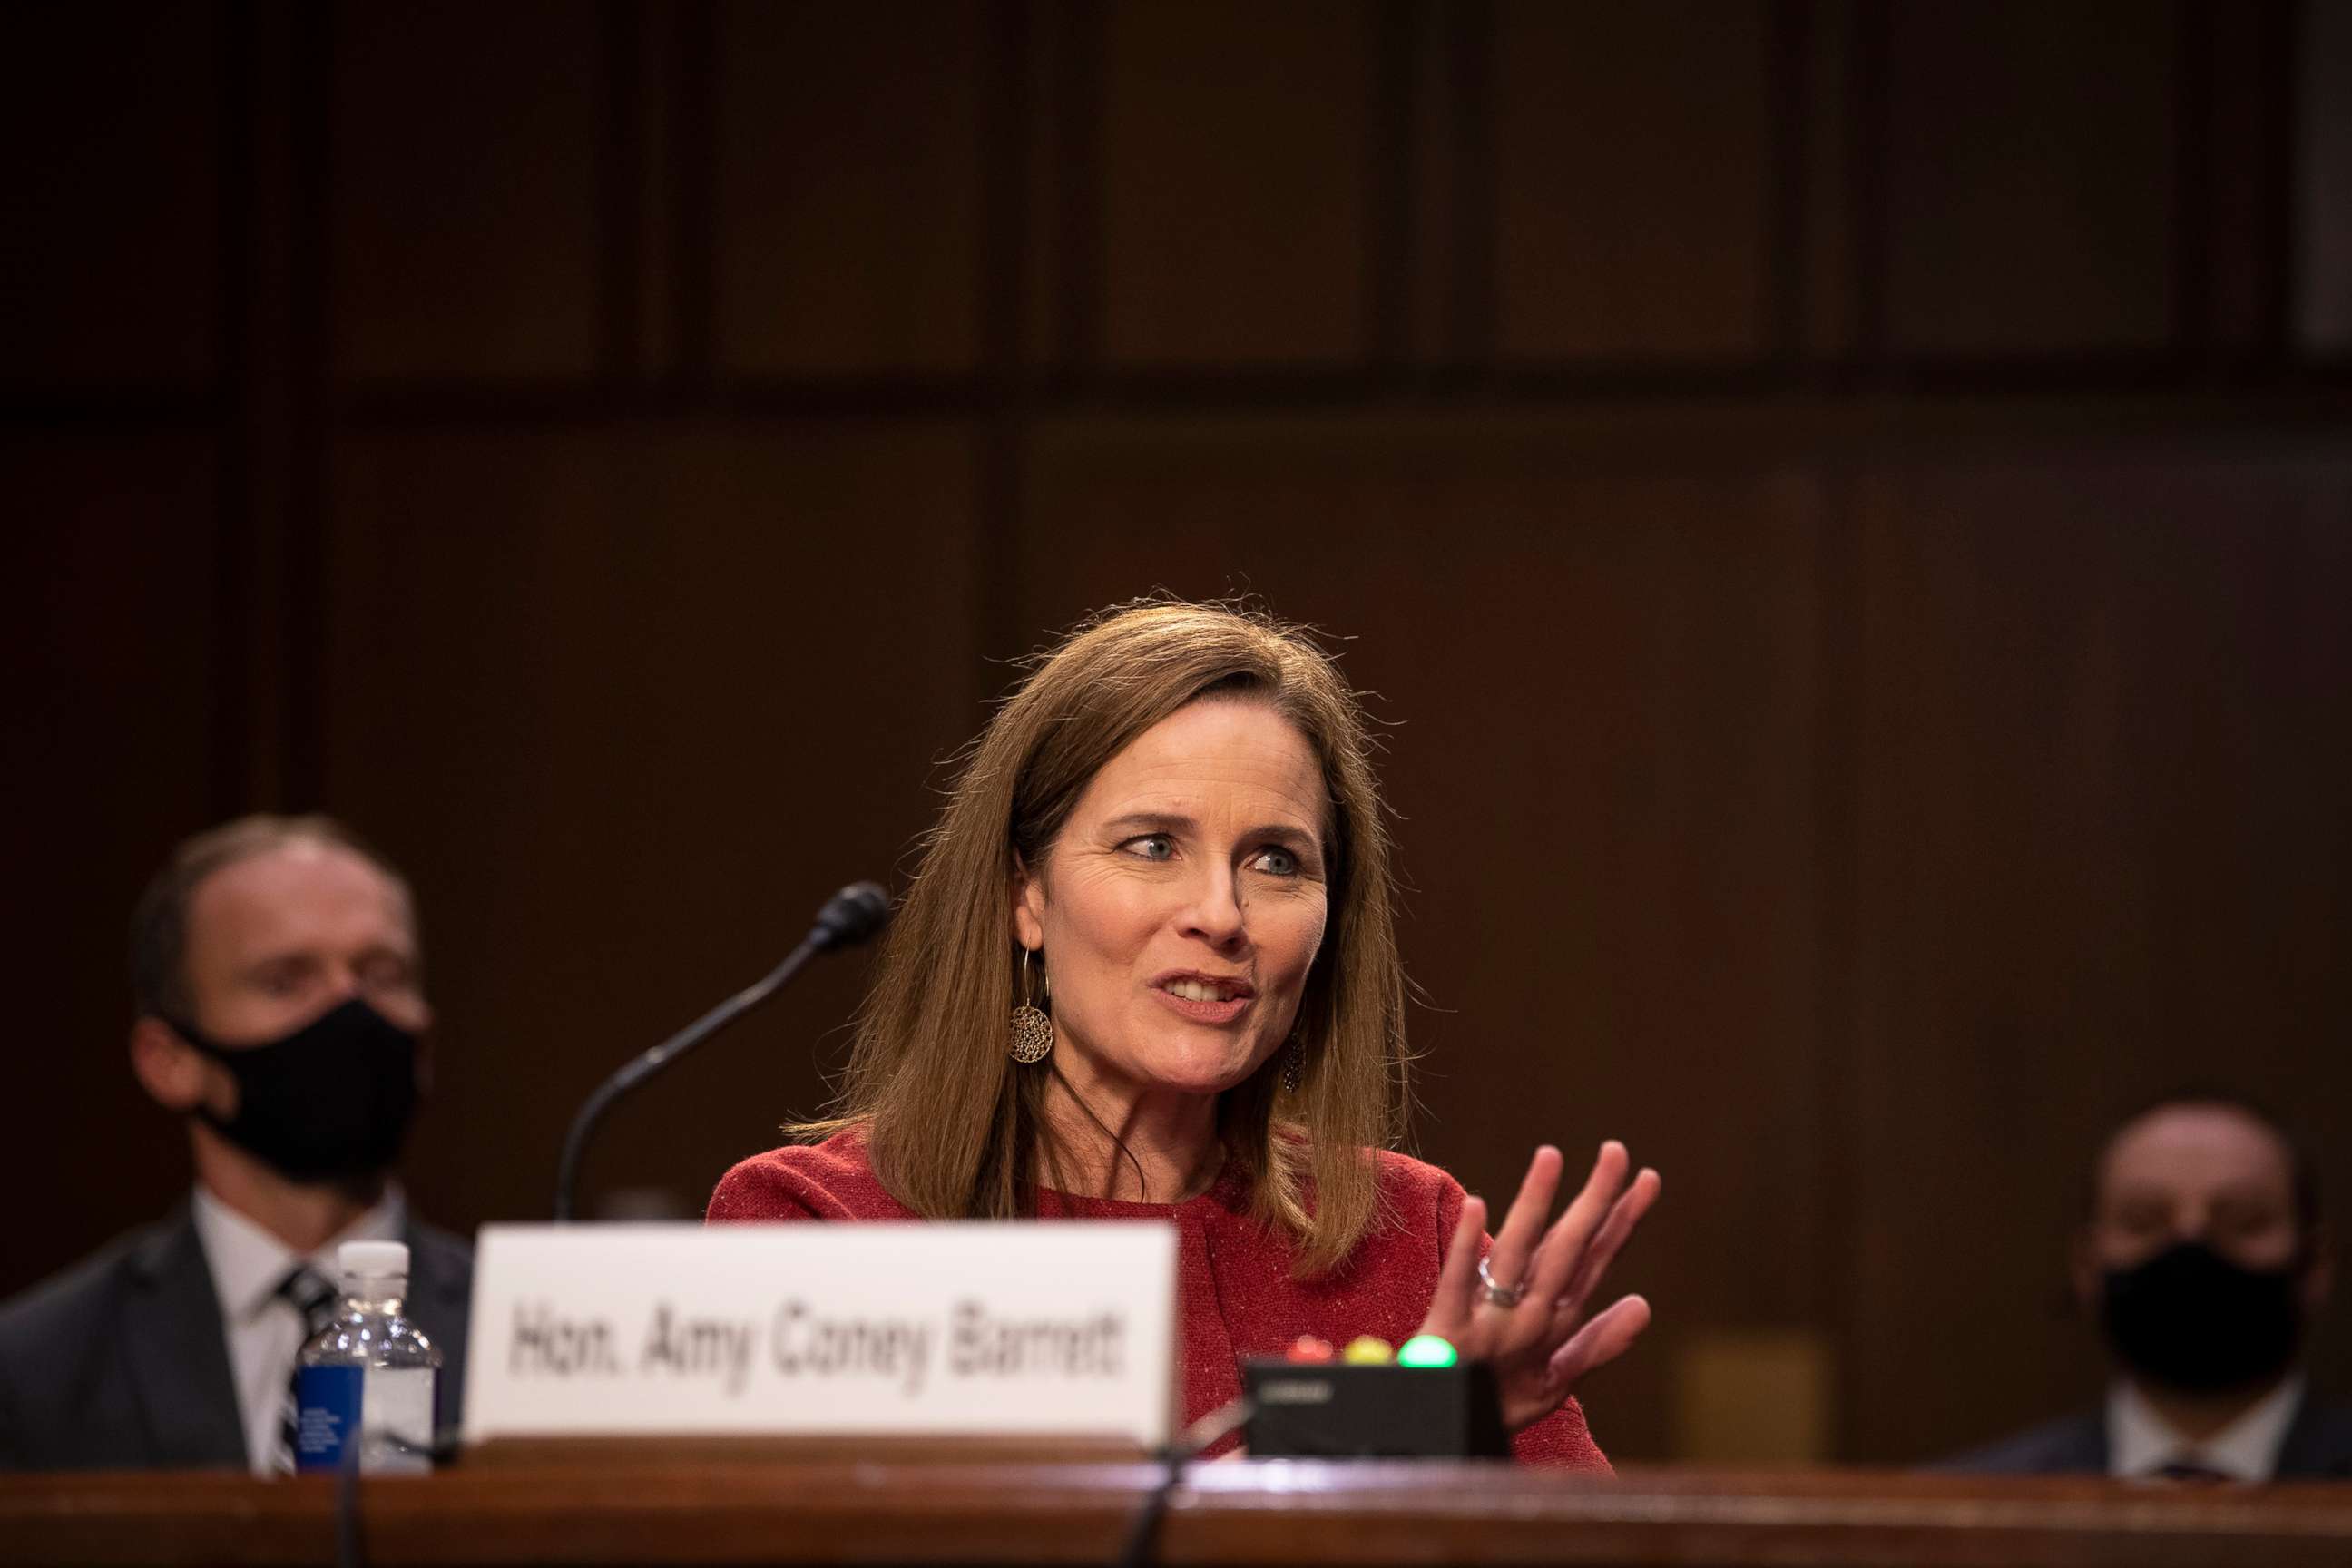 PHOTO: Supreme Court justice nominee Amy Coney Barrett testifies during her Senate Judiciary Committee confirmation hearing in Washington on Oct. 13, 2020.